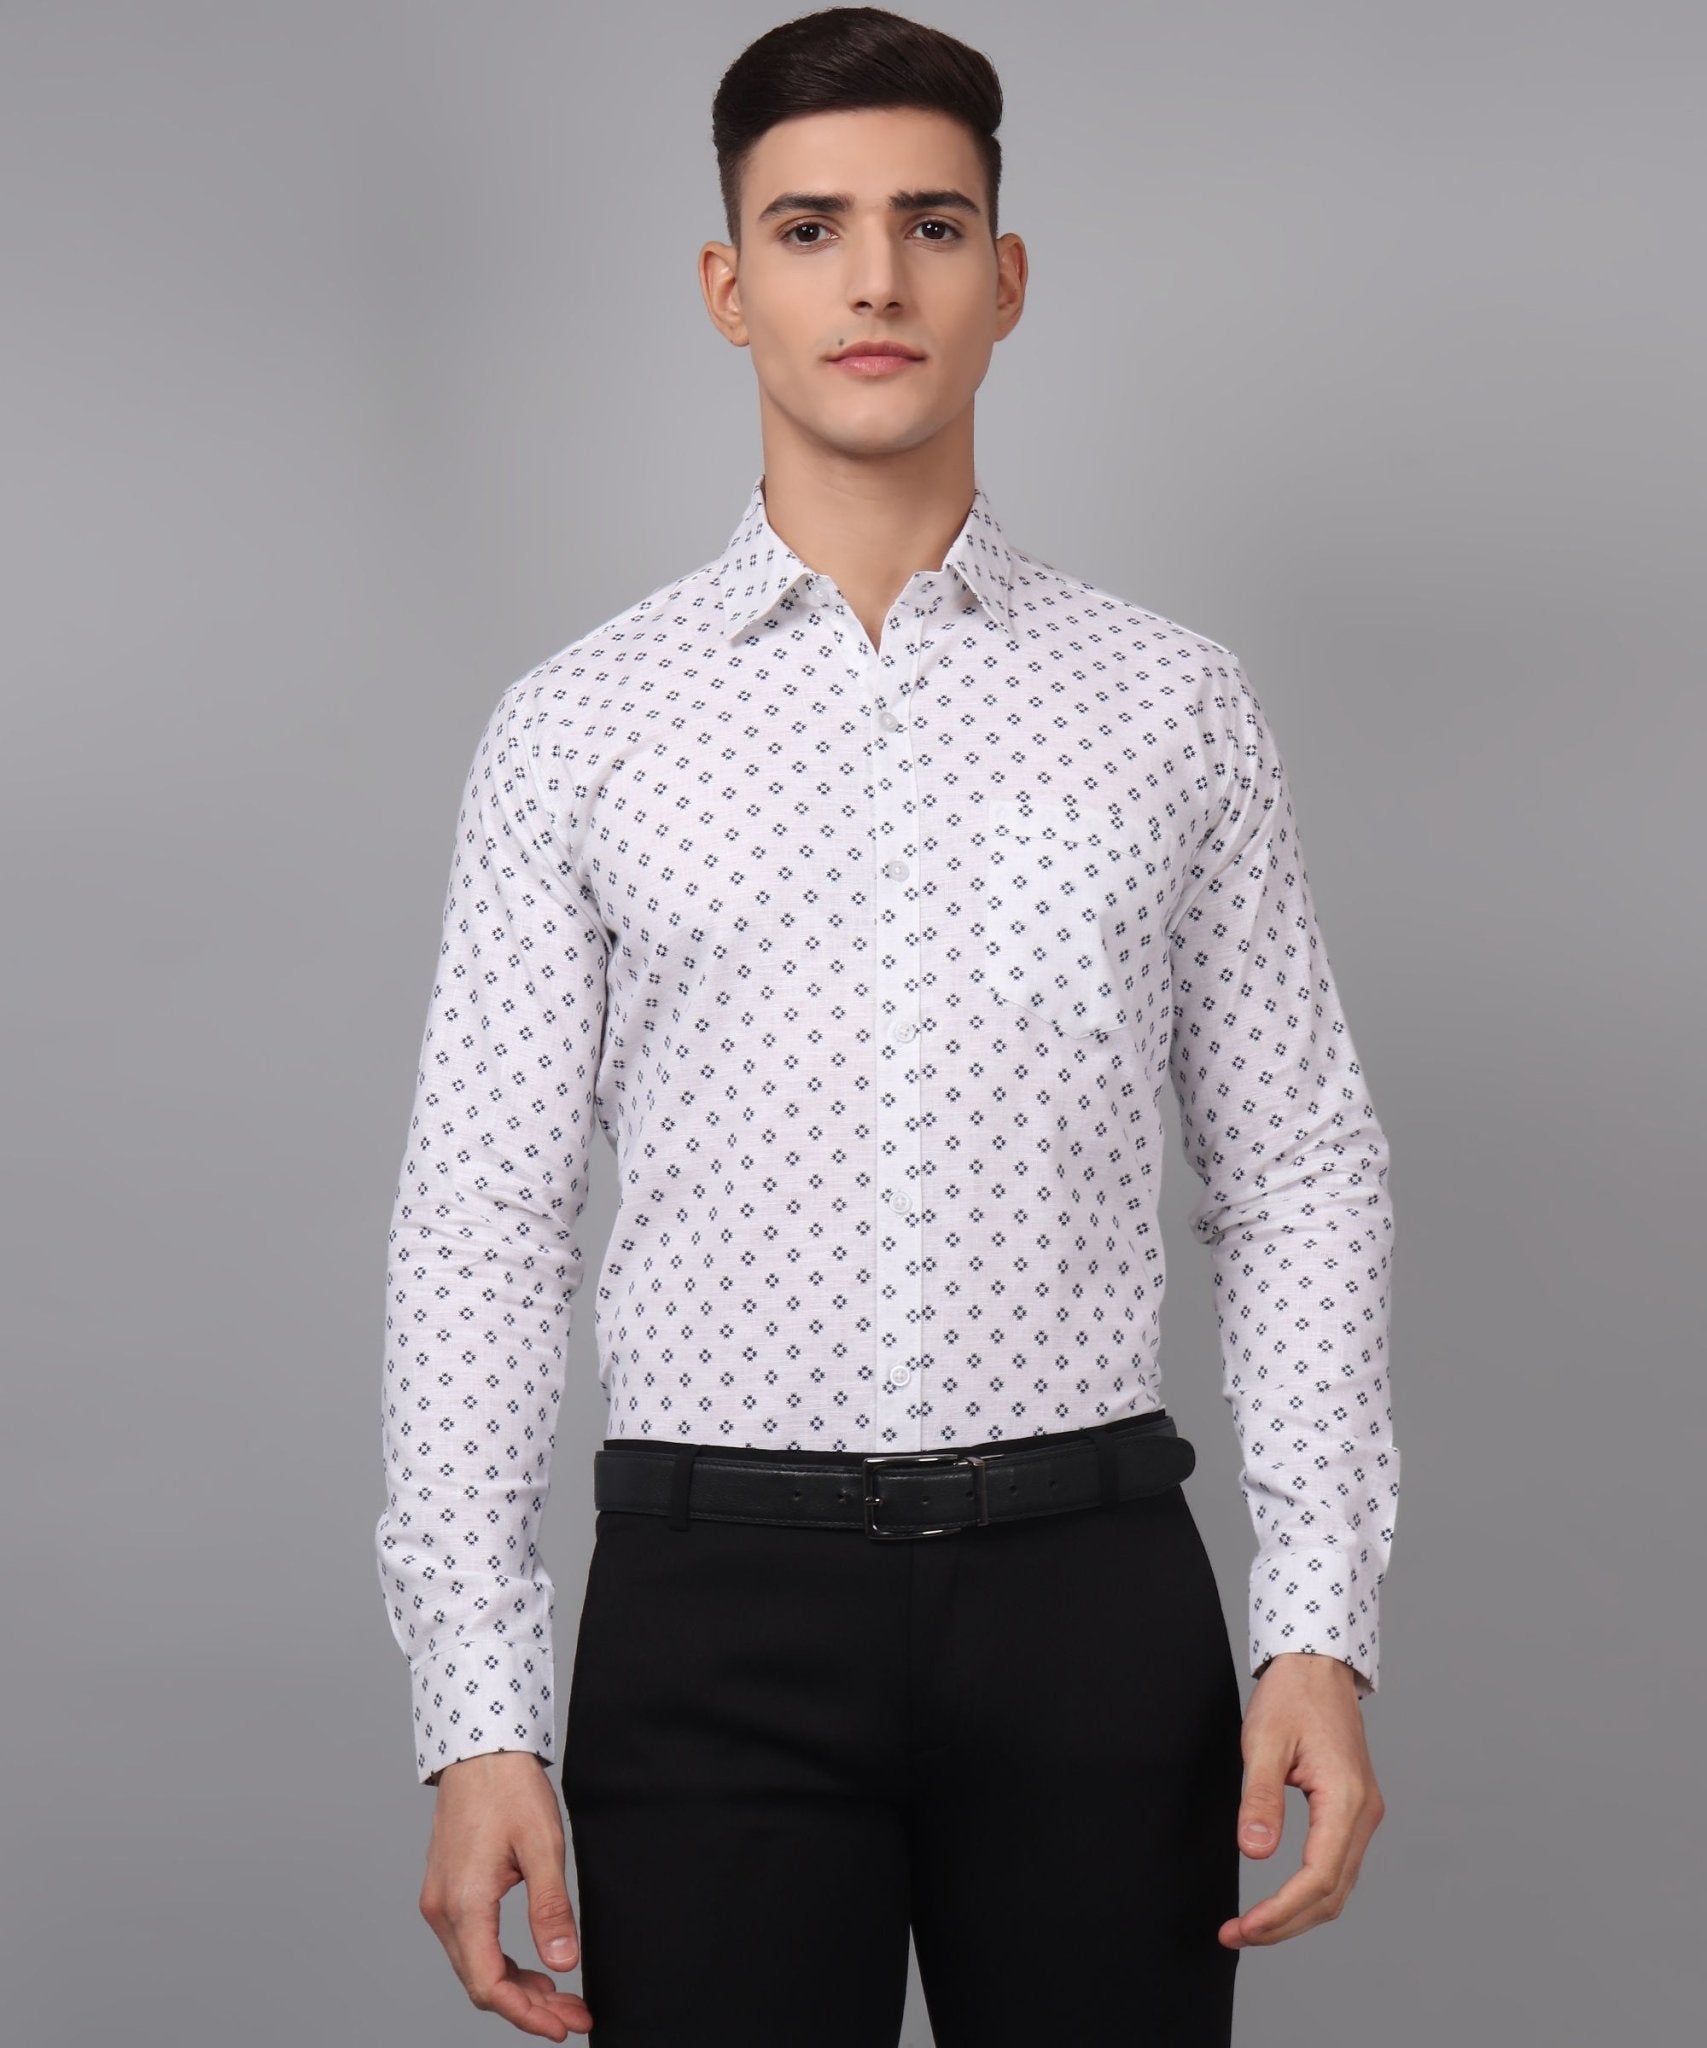 Luxe TryBuy Premium Cotton Linen White Printed Casual/Formal Shirt for Men - TryBuy® USA🇺🇸